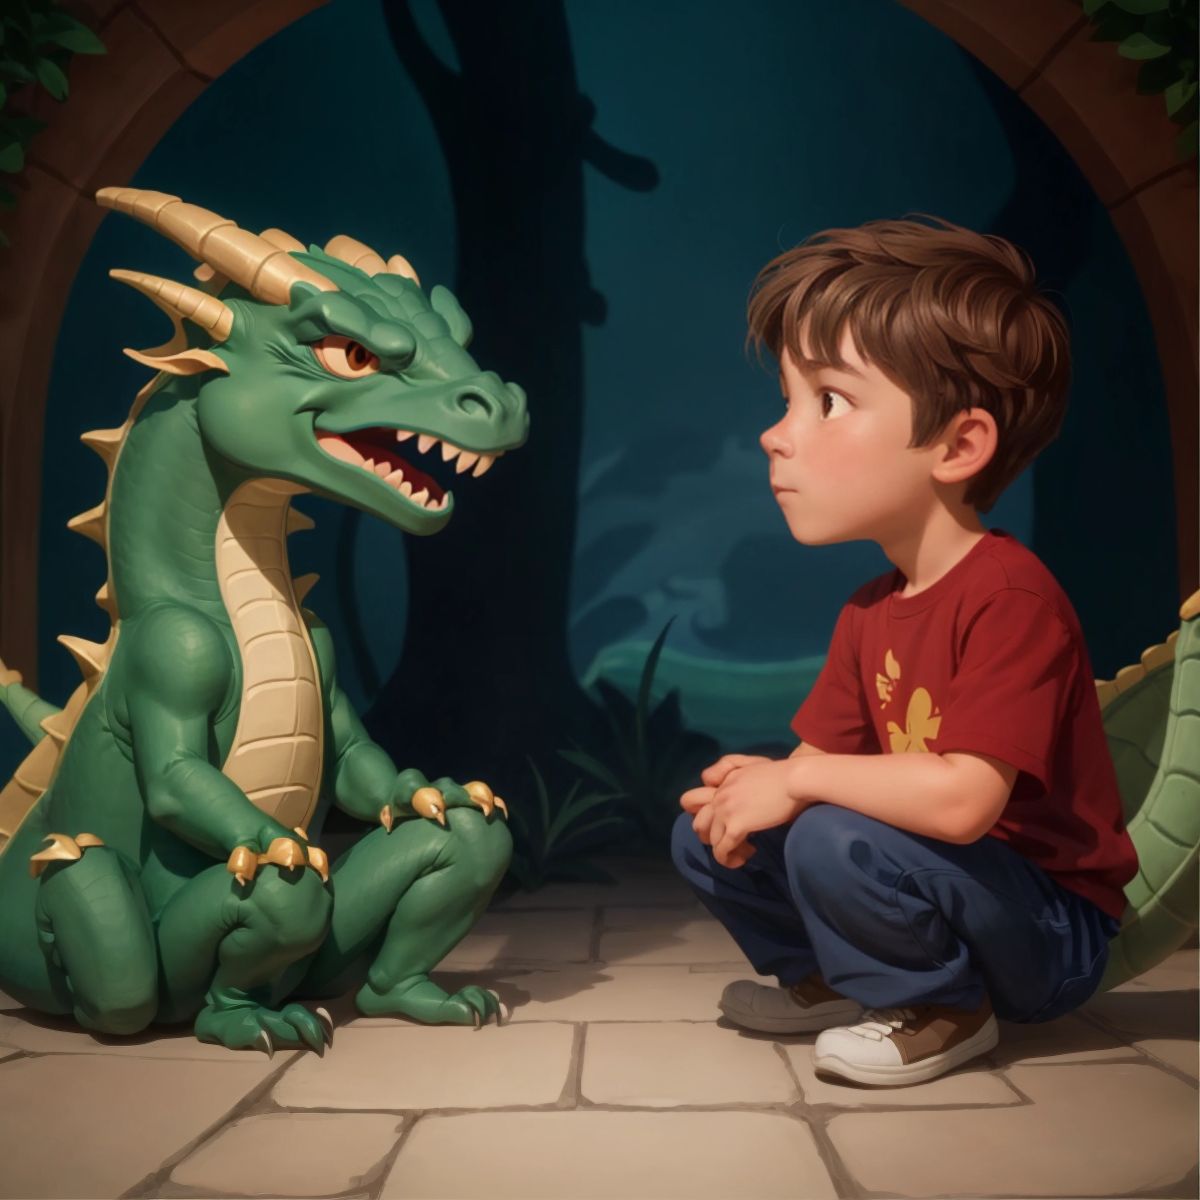 The dragon showing a kind expression as it converses with Alex.